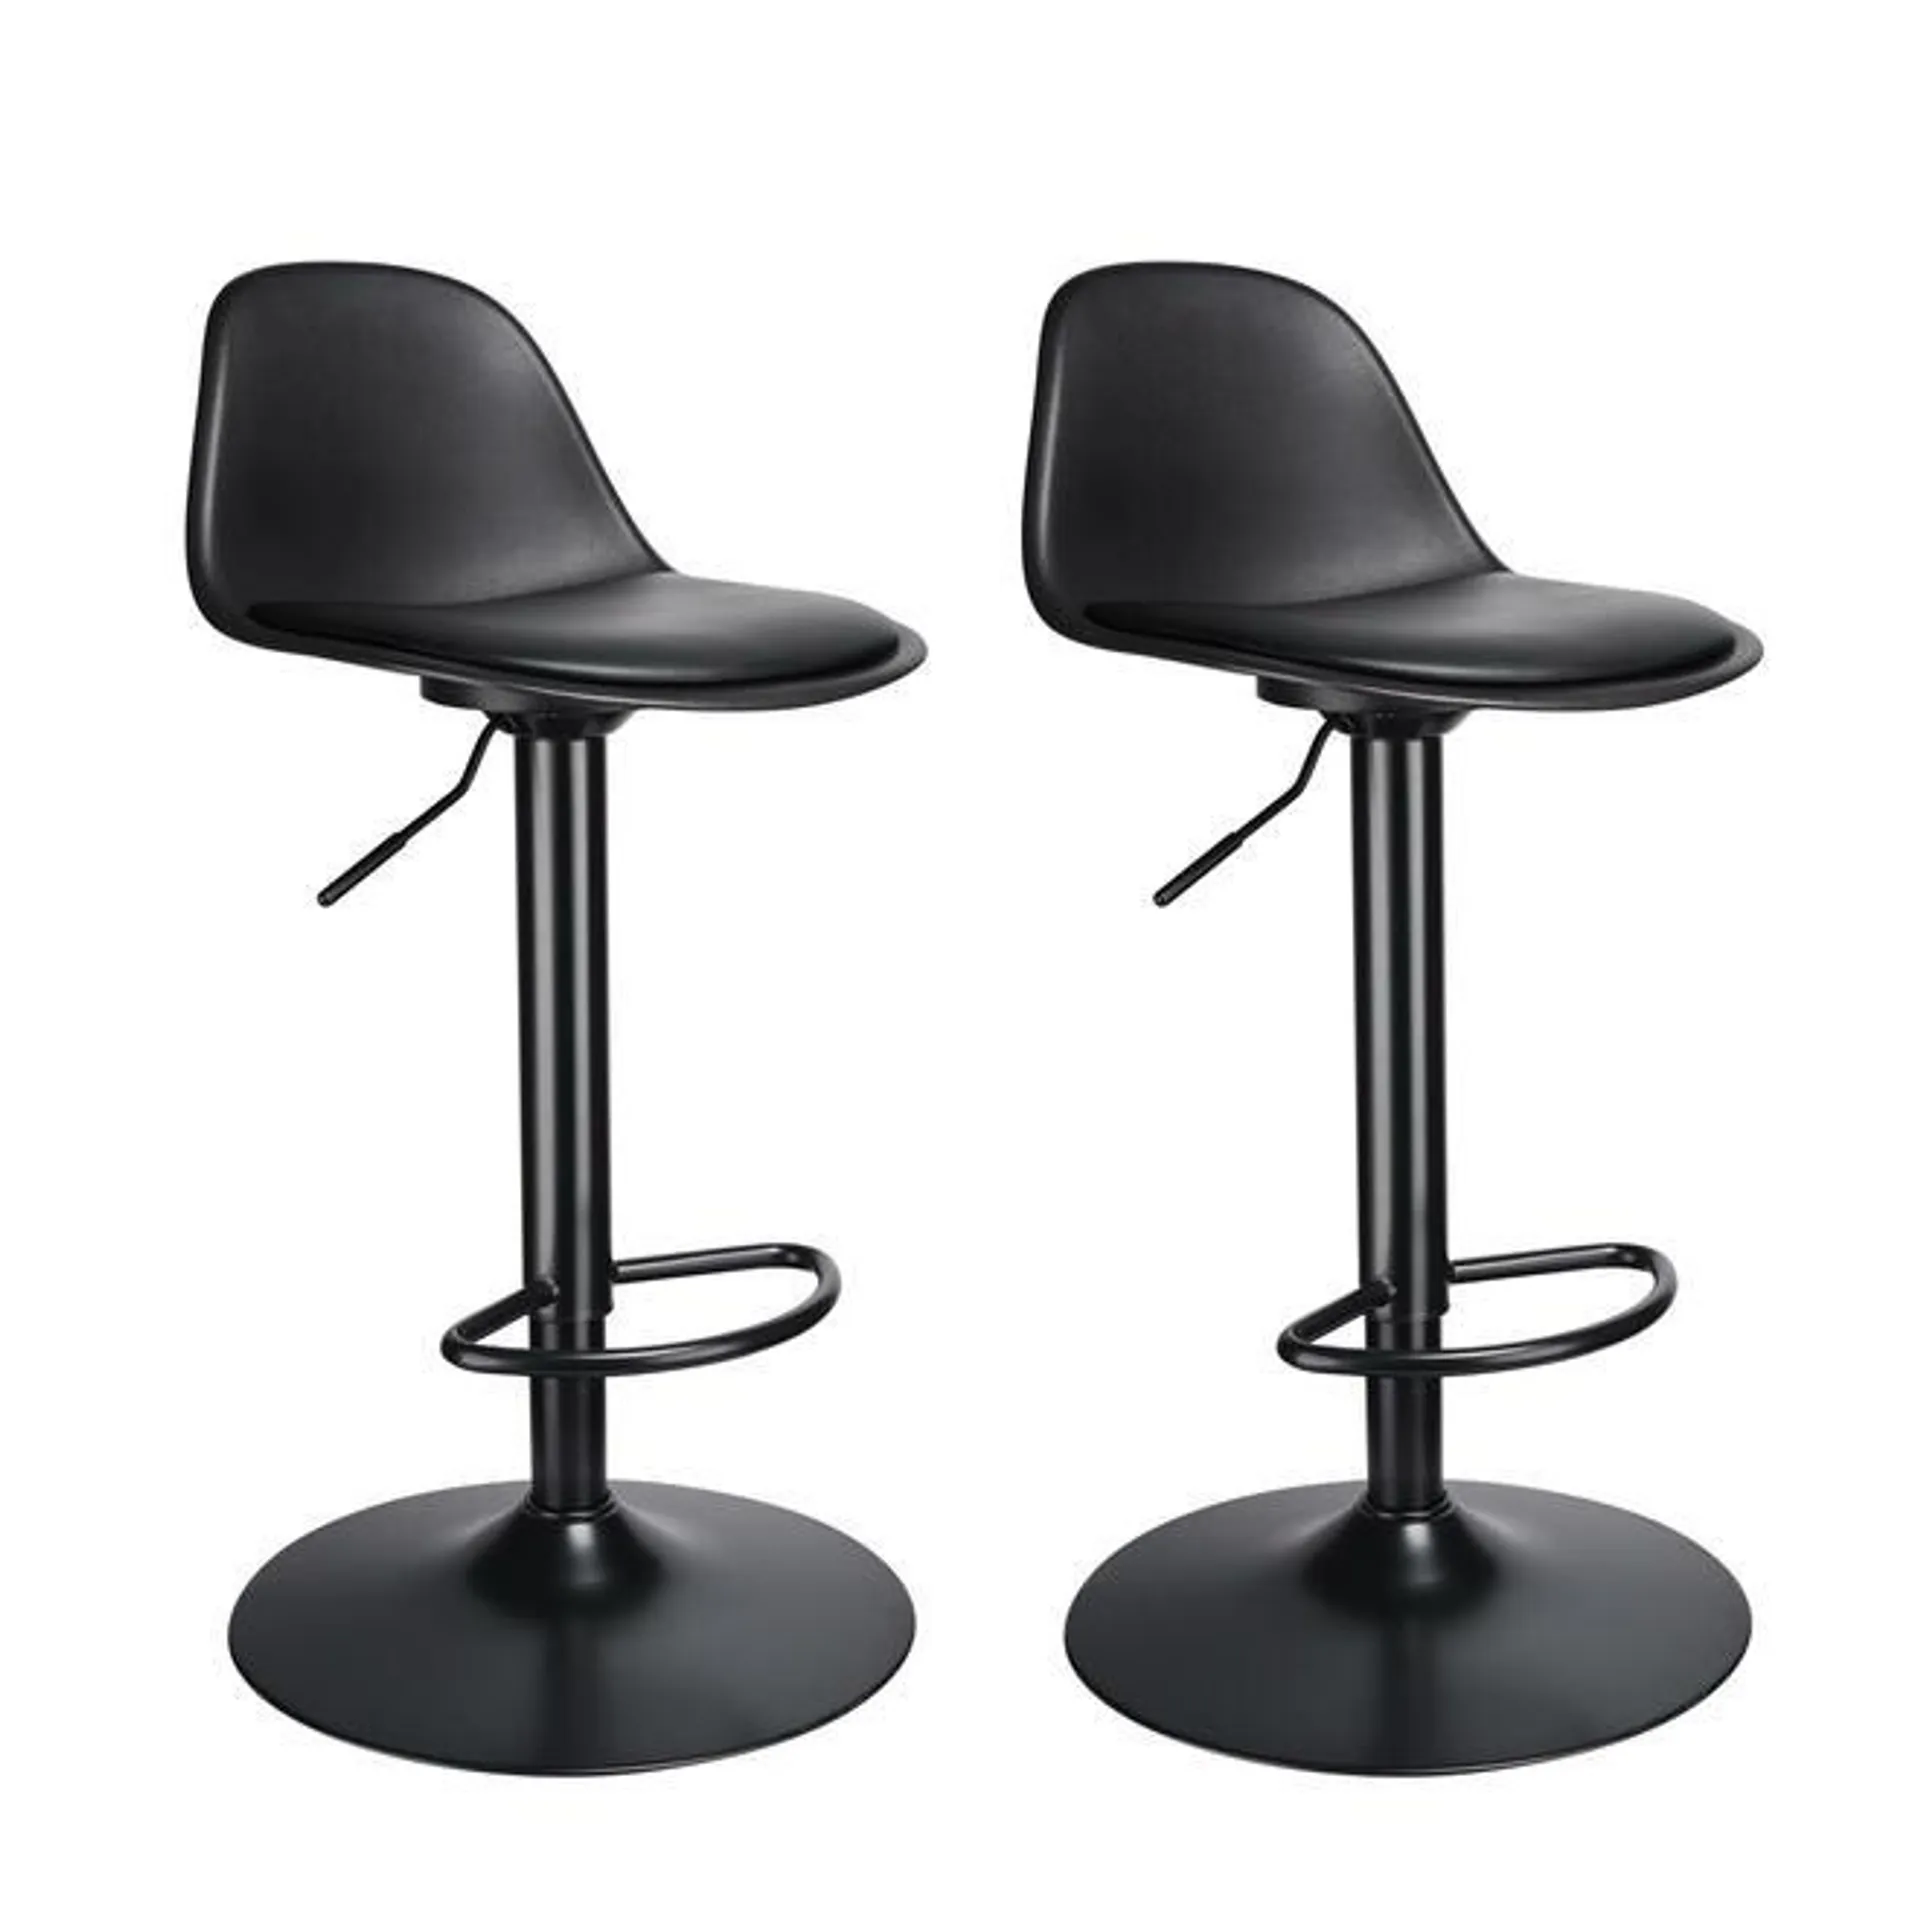 Retro-Style BarStools with Adjustable Height and 360° Rotation, Set of 2, Black - Moustache®